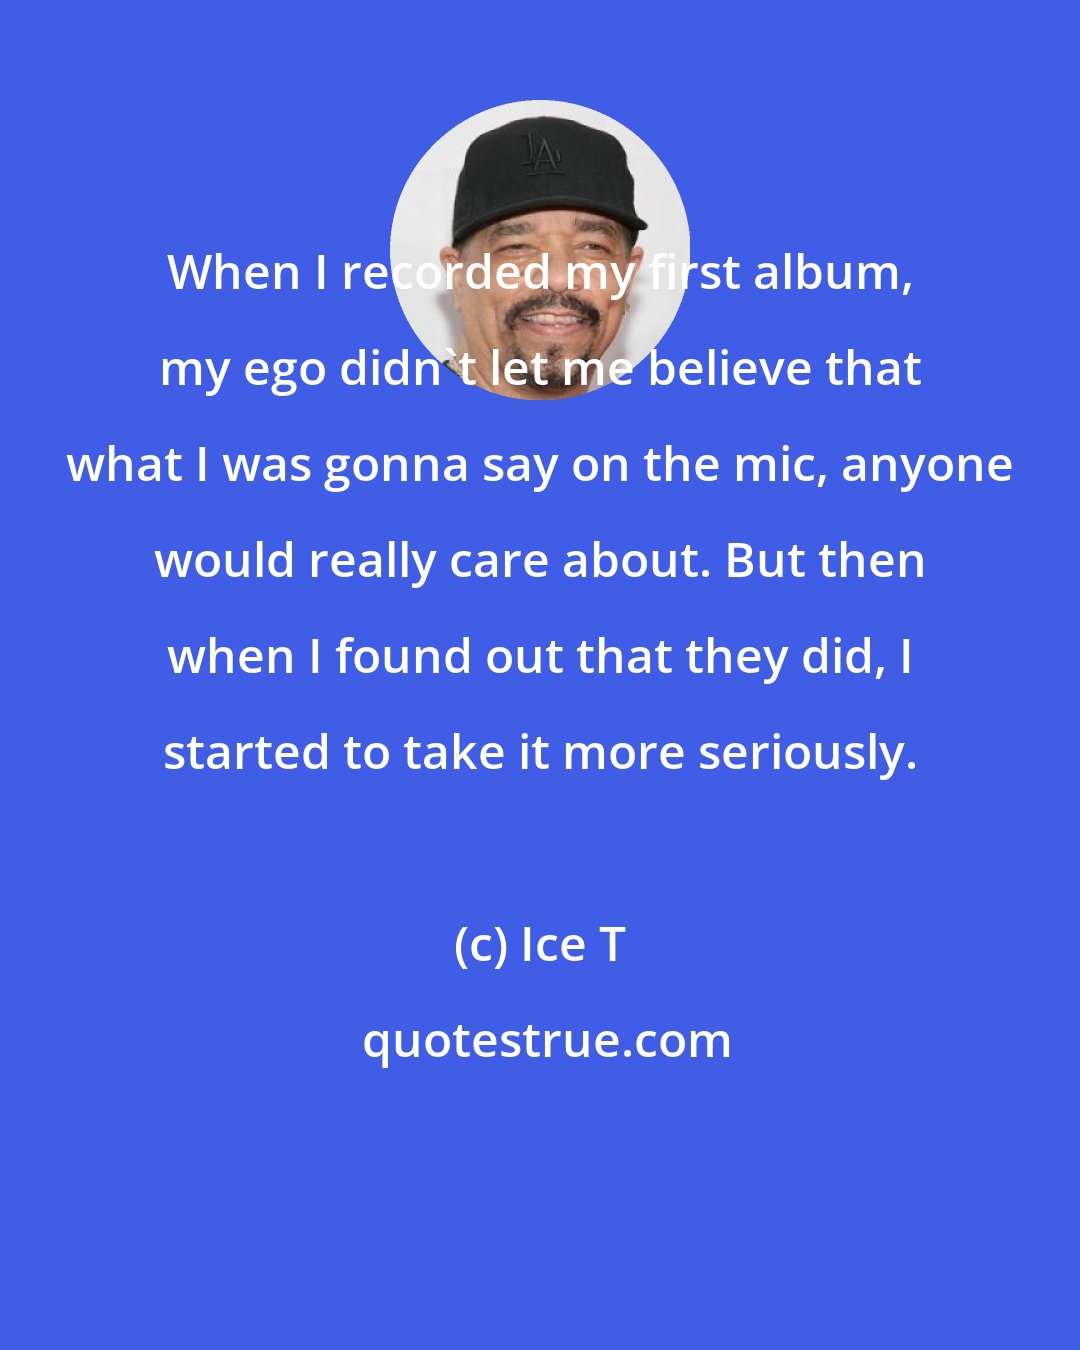 Ice T: When I recorded my first album, my ego didn't let me believe that what I was gonna say on the mic, anyone would really care about. But then when I found out that they did, I started to take it more seriously.